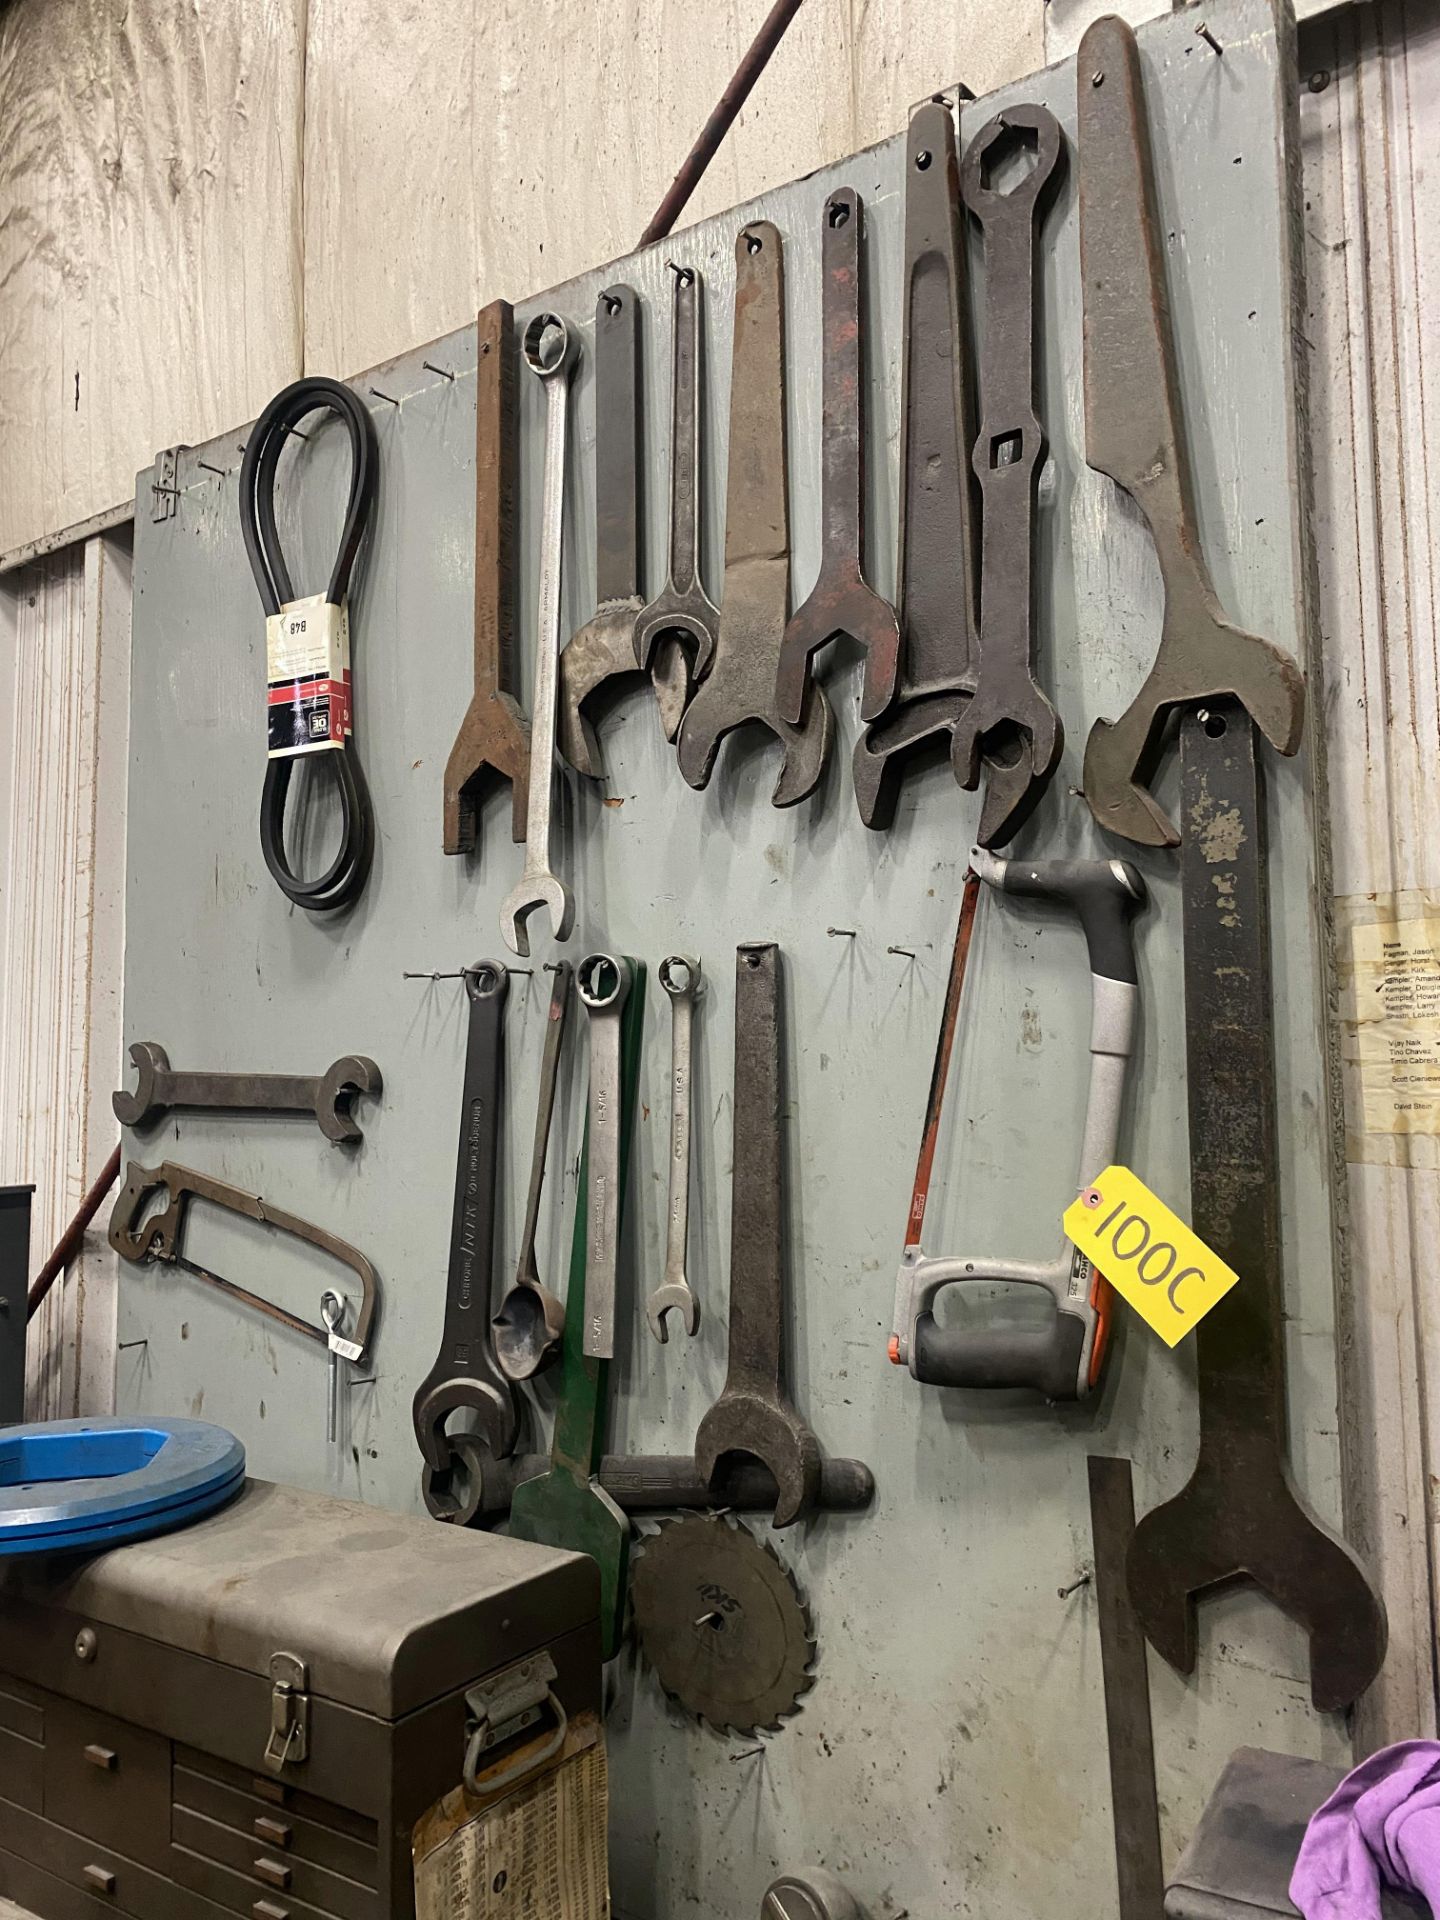 HACK SAWS, MACHINE WRENCHES, ETC ON WALL